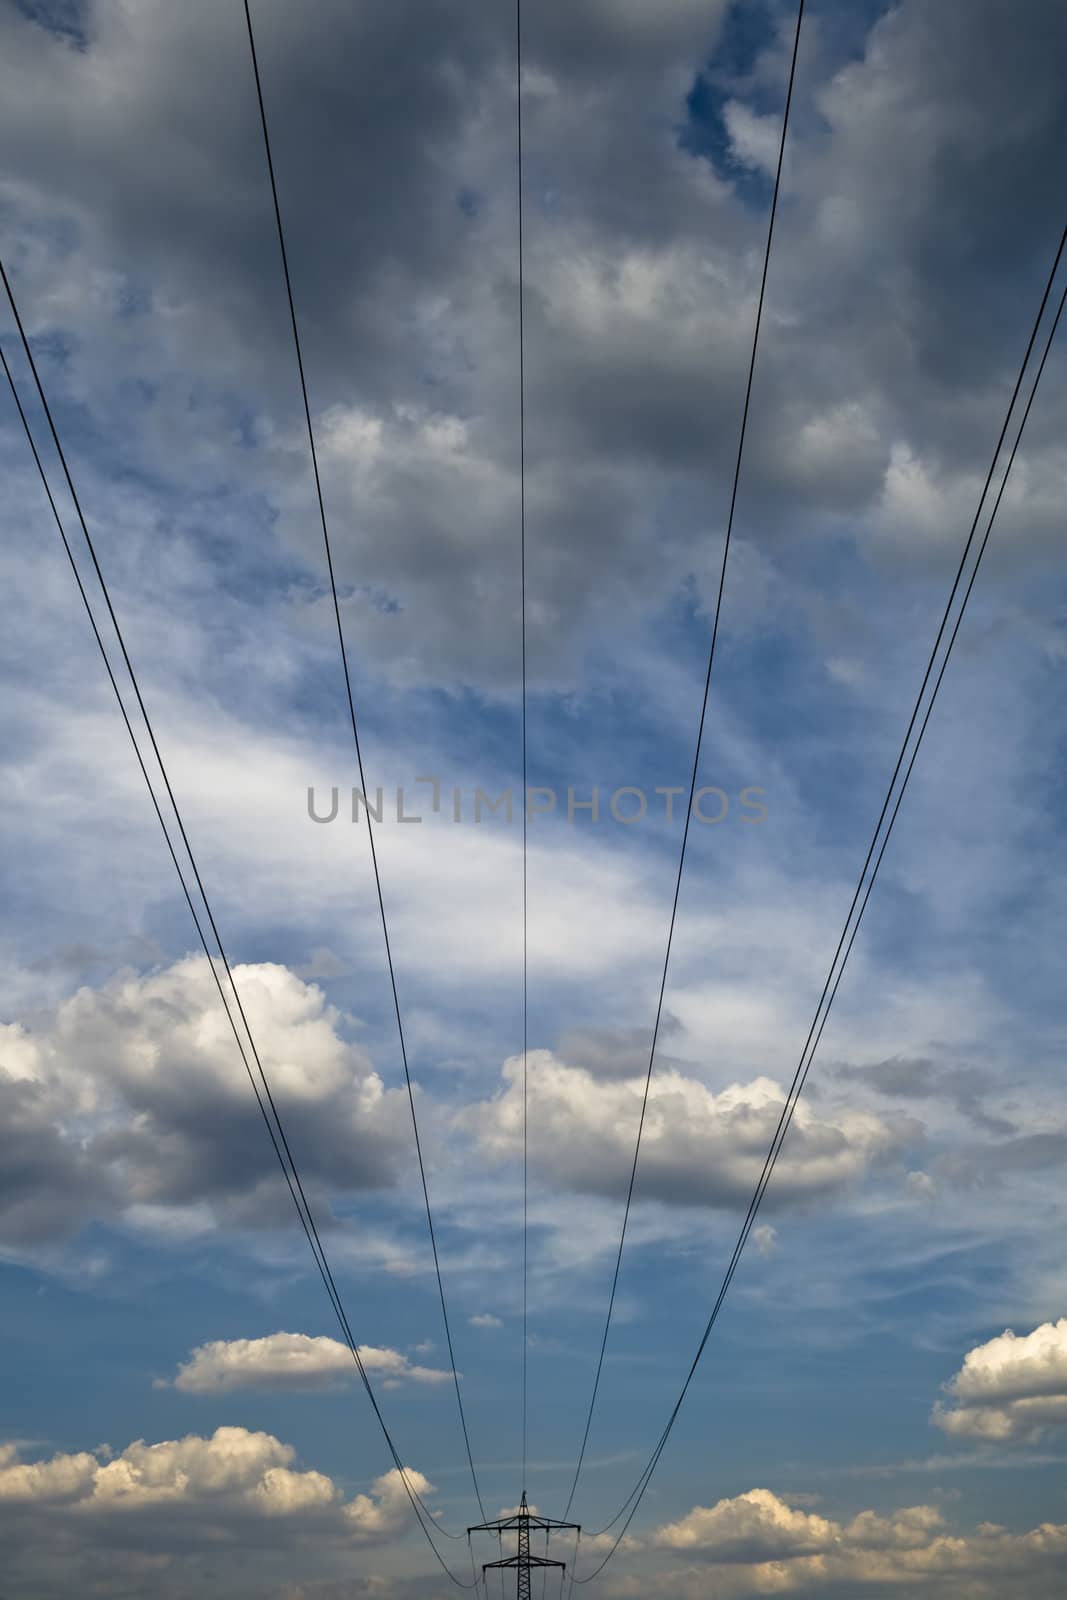 the power lines and towers against blue sky by Nickondr